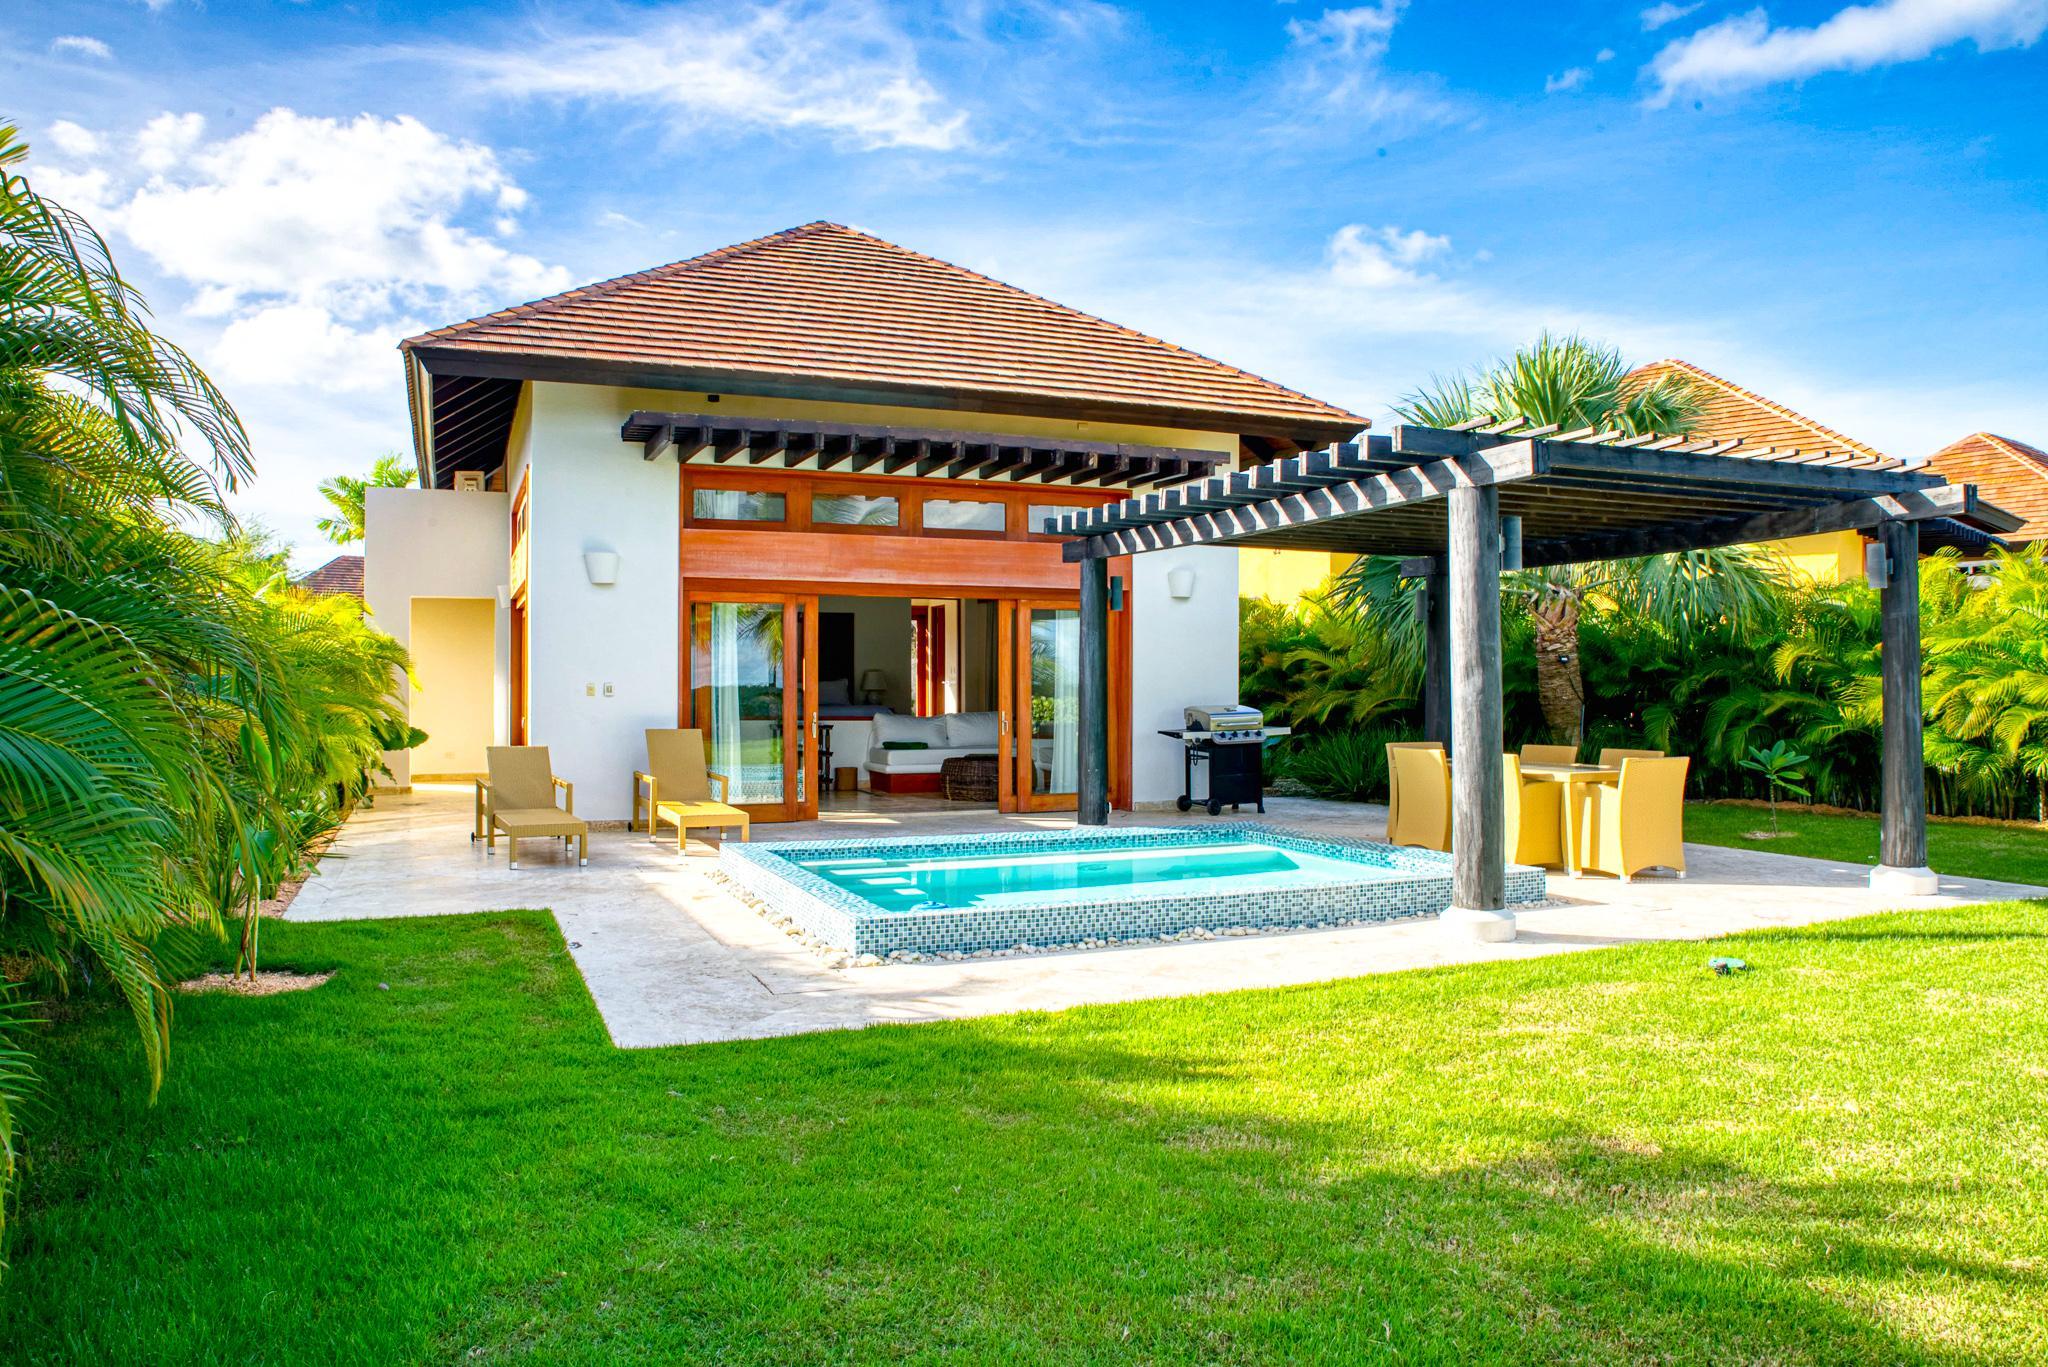 Go For A Dip And Chill At This Luxuriant Bungalow - Punta Cana